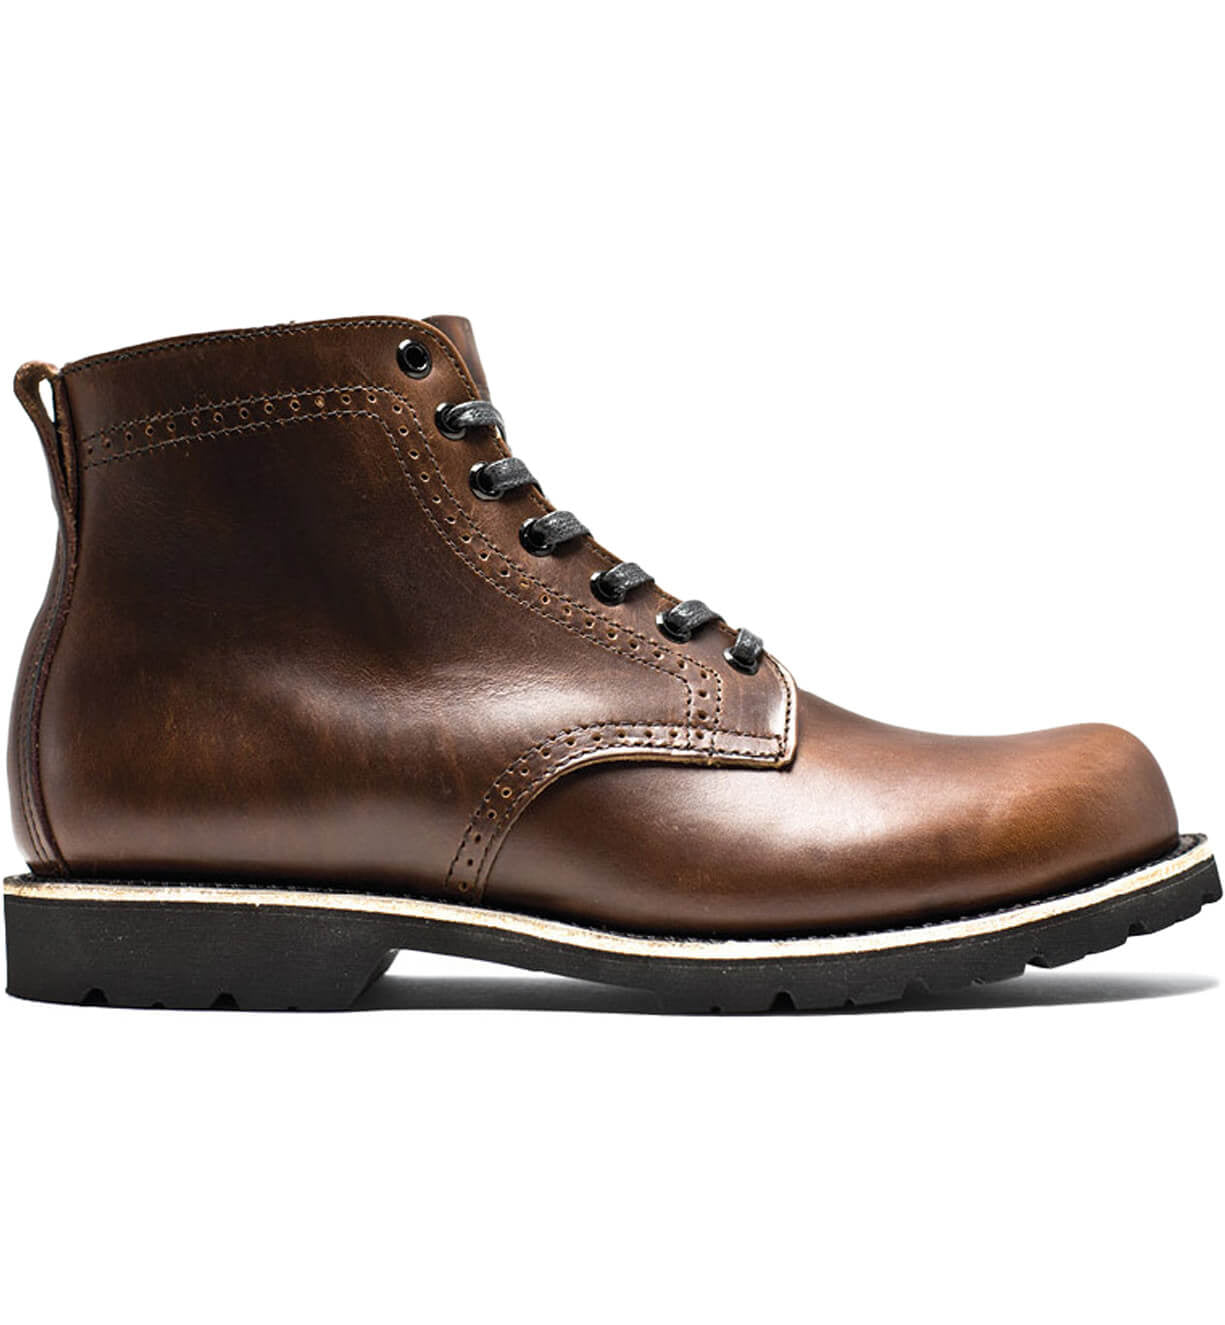 The Tydus men's brown leather boot with a rugged outsole is shown on a white background, highlighting Broken Homme's refined style.